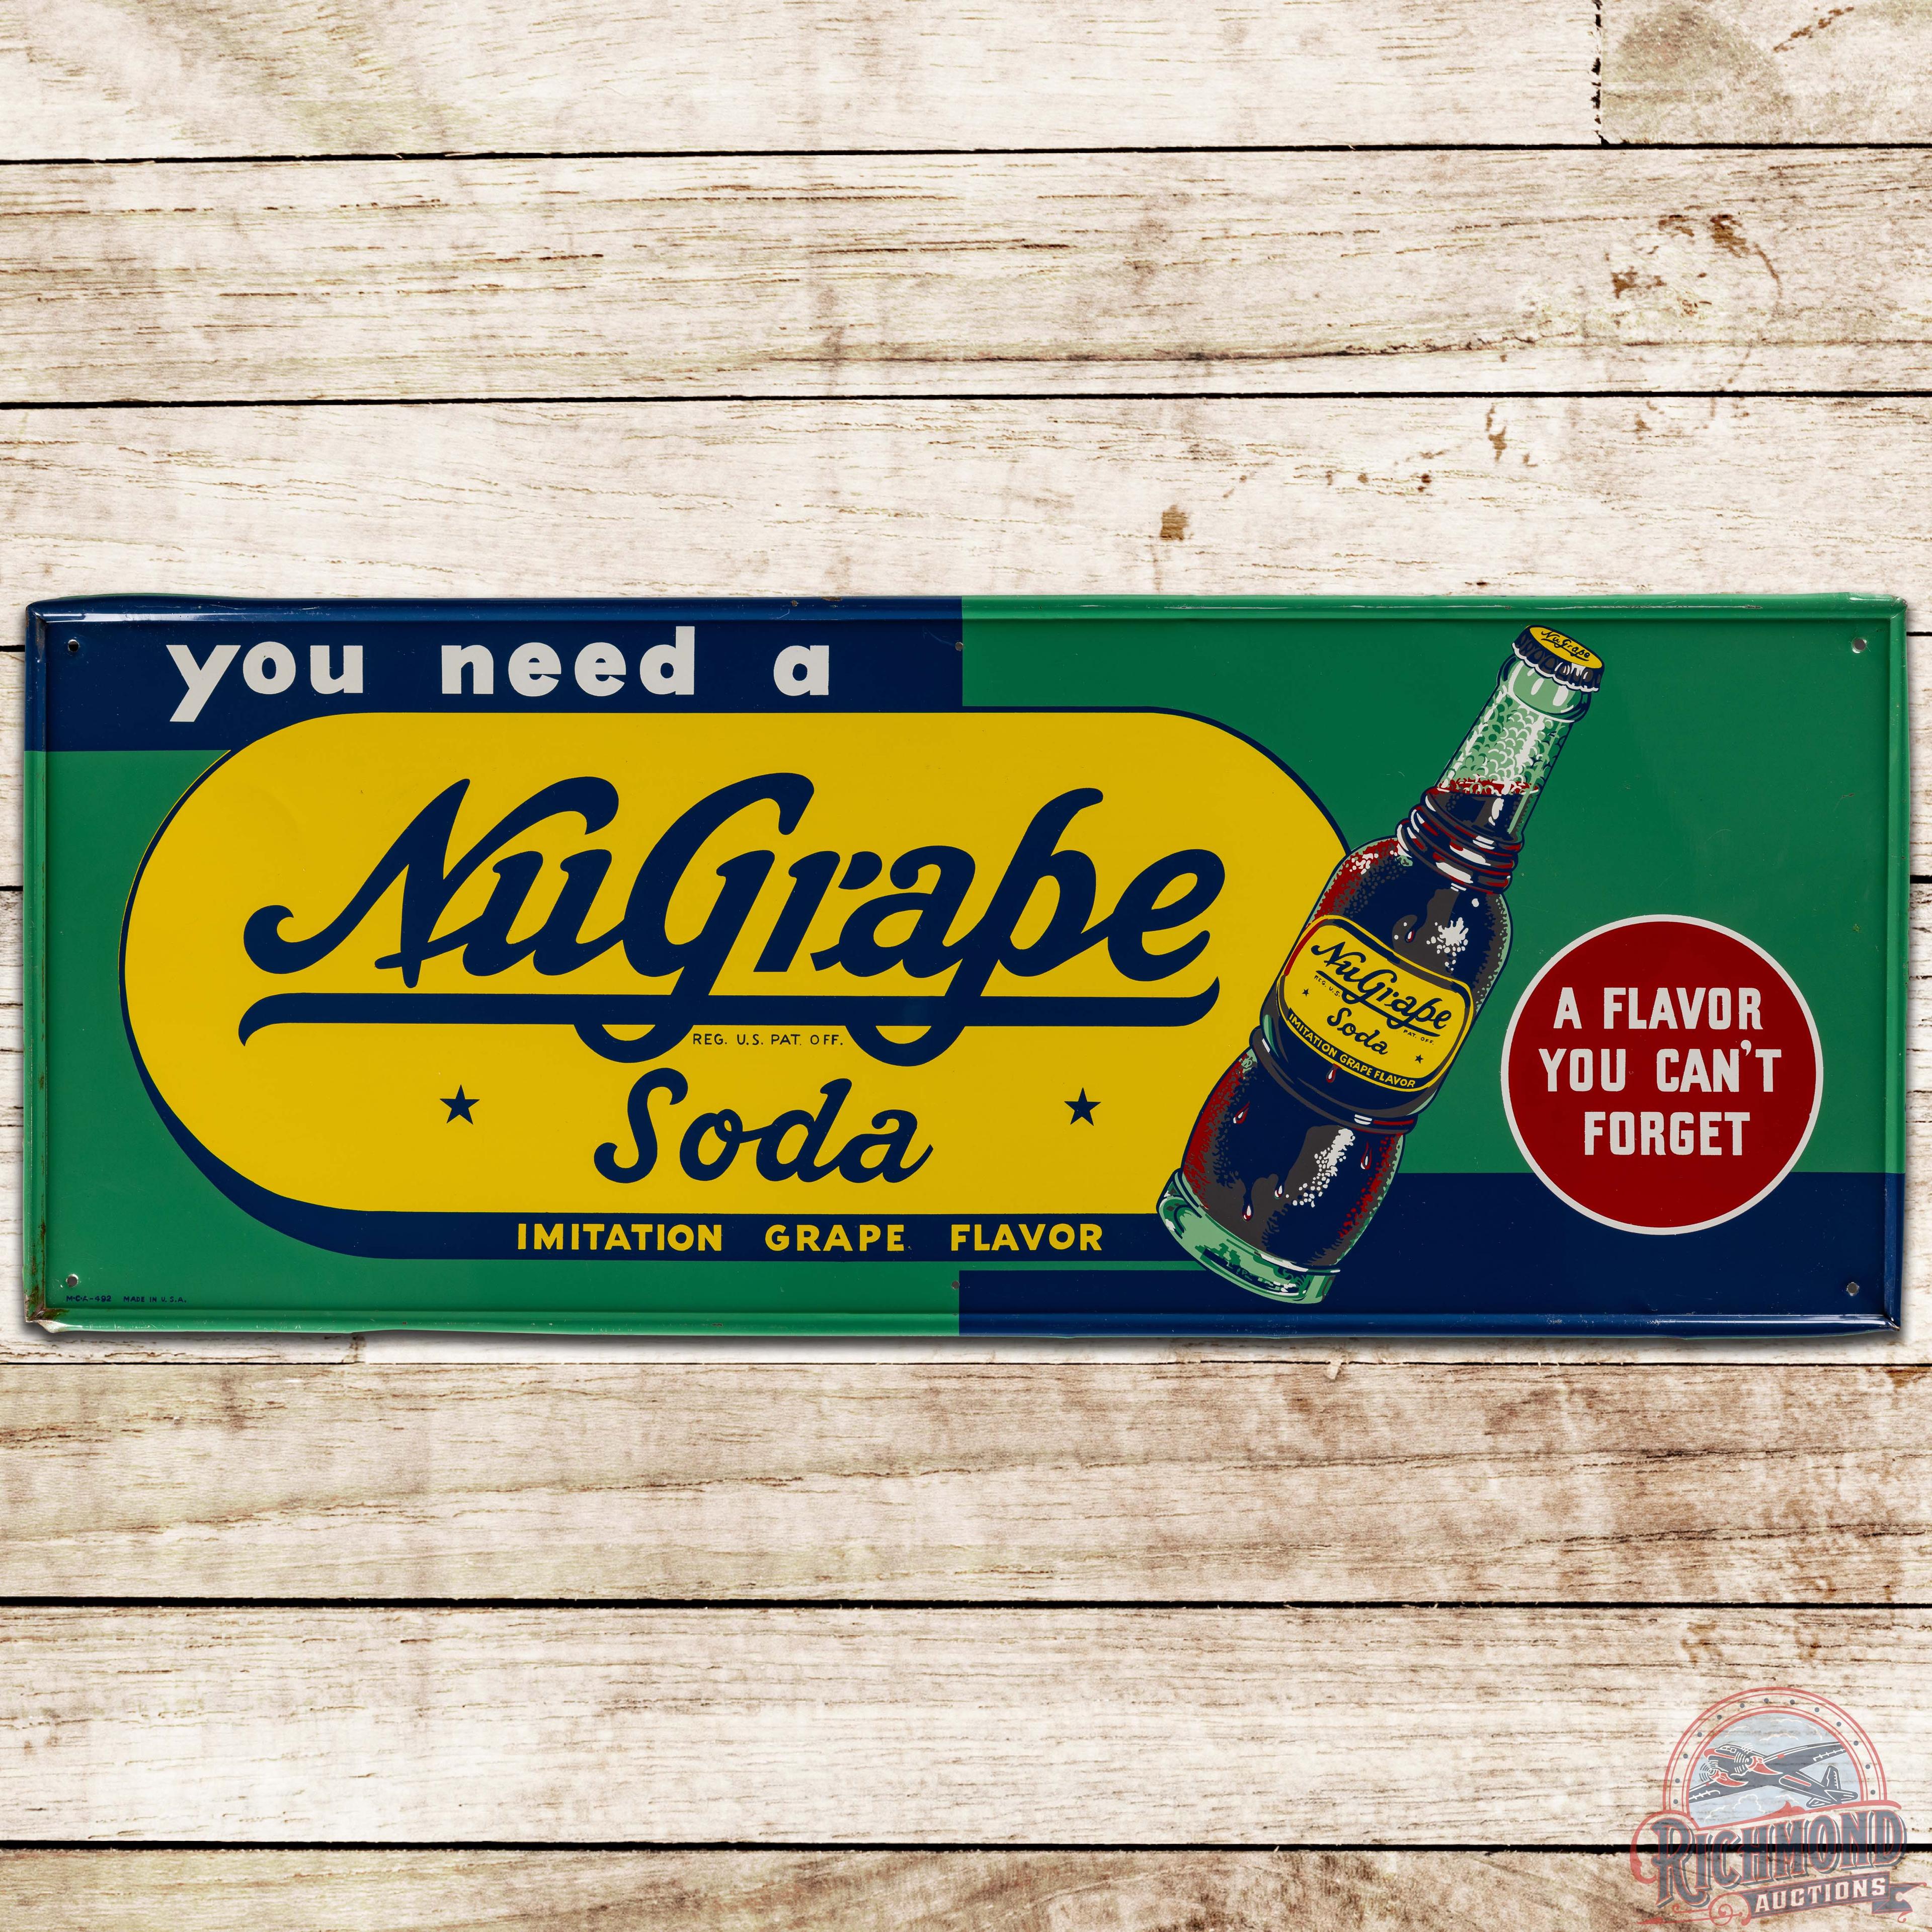 Nugrape Soda "A Flavor You Can't Forget" SS Tin Sign w/ Bottle